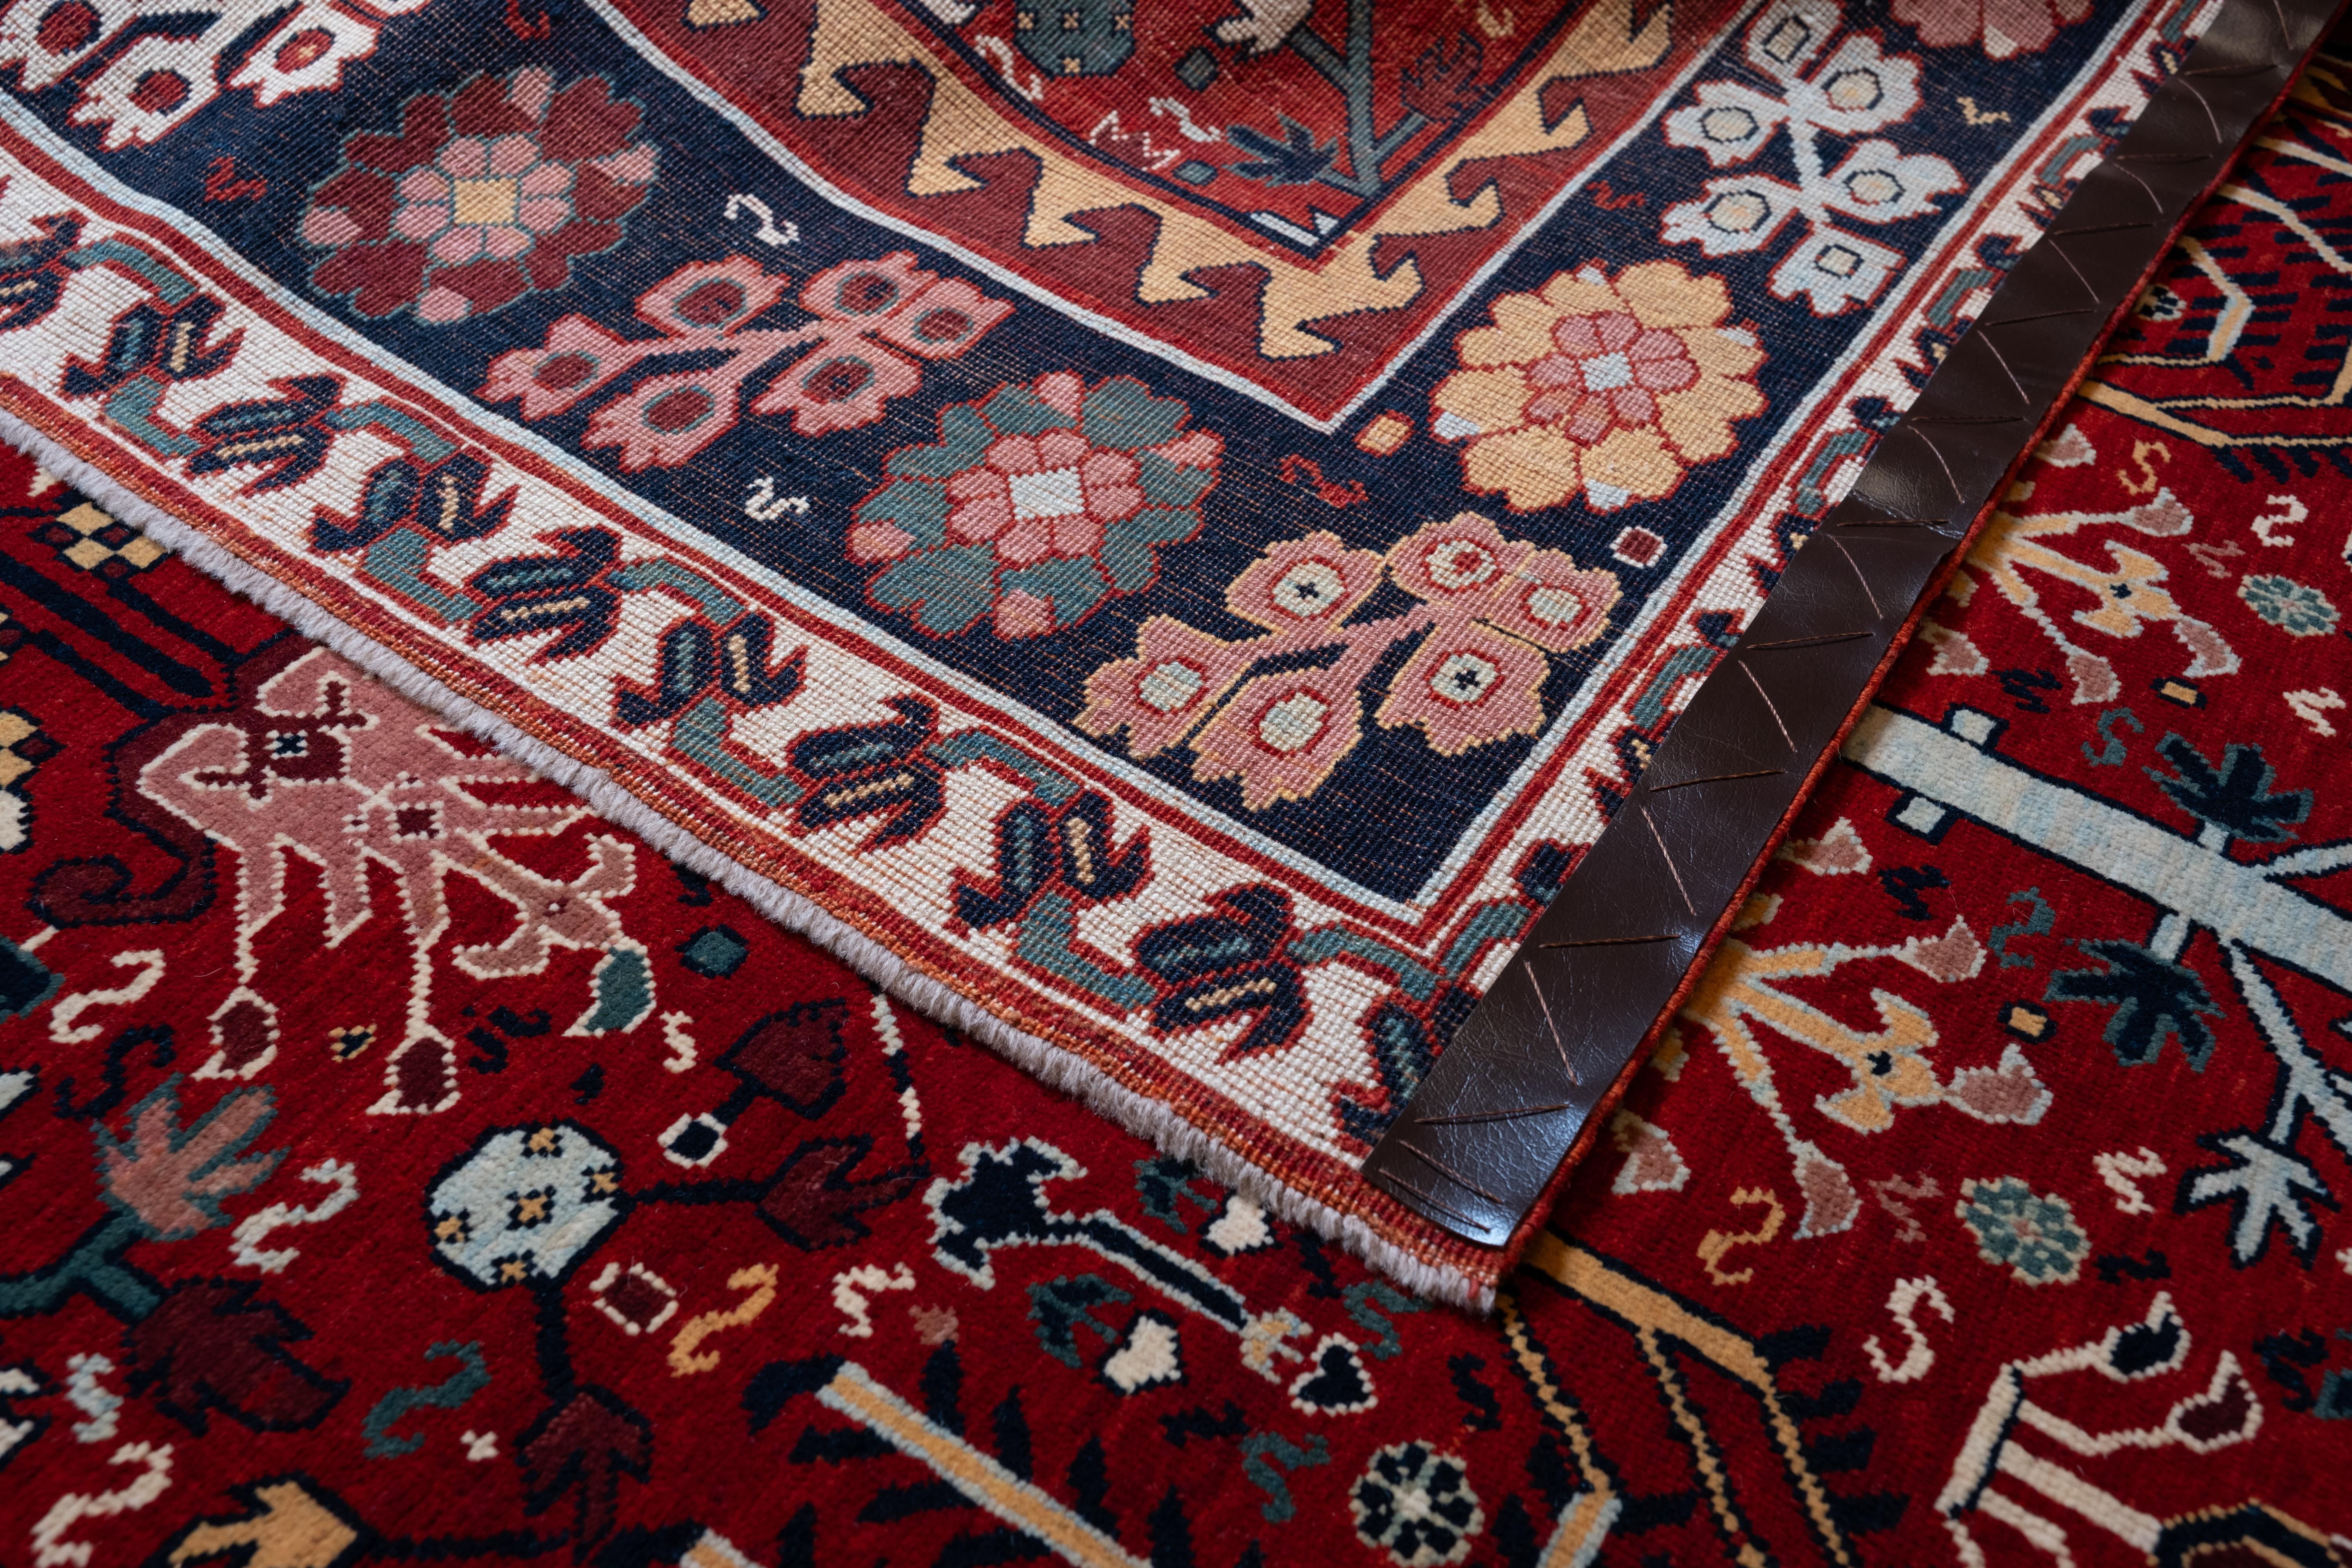 Vegetable Dyed Ararat Rugs Bid Majnum on Red Field Rug, 17th C Revival Carpet, Natural Dyed For Sale